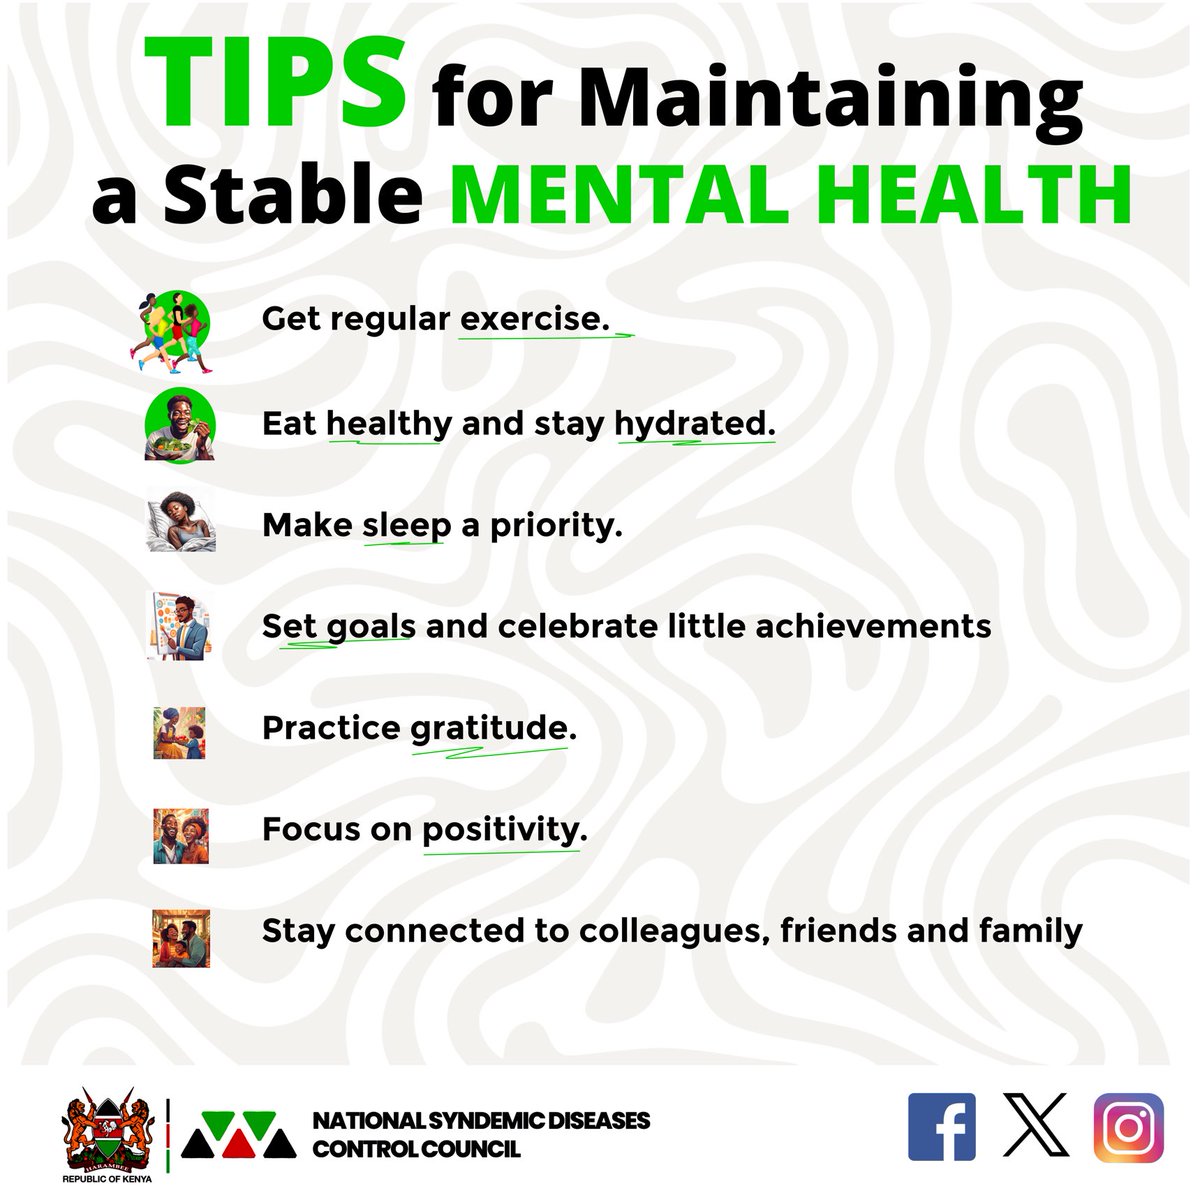 This is Mental Health Awareness Month. Whenever you feel stressed out, reach out and seek support from colleagues, friends, and family. Never give up on your journey to healing and happiness.

#mentalhealthawarenessmonth
#EndAIDSby2030